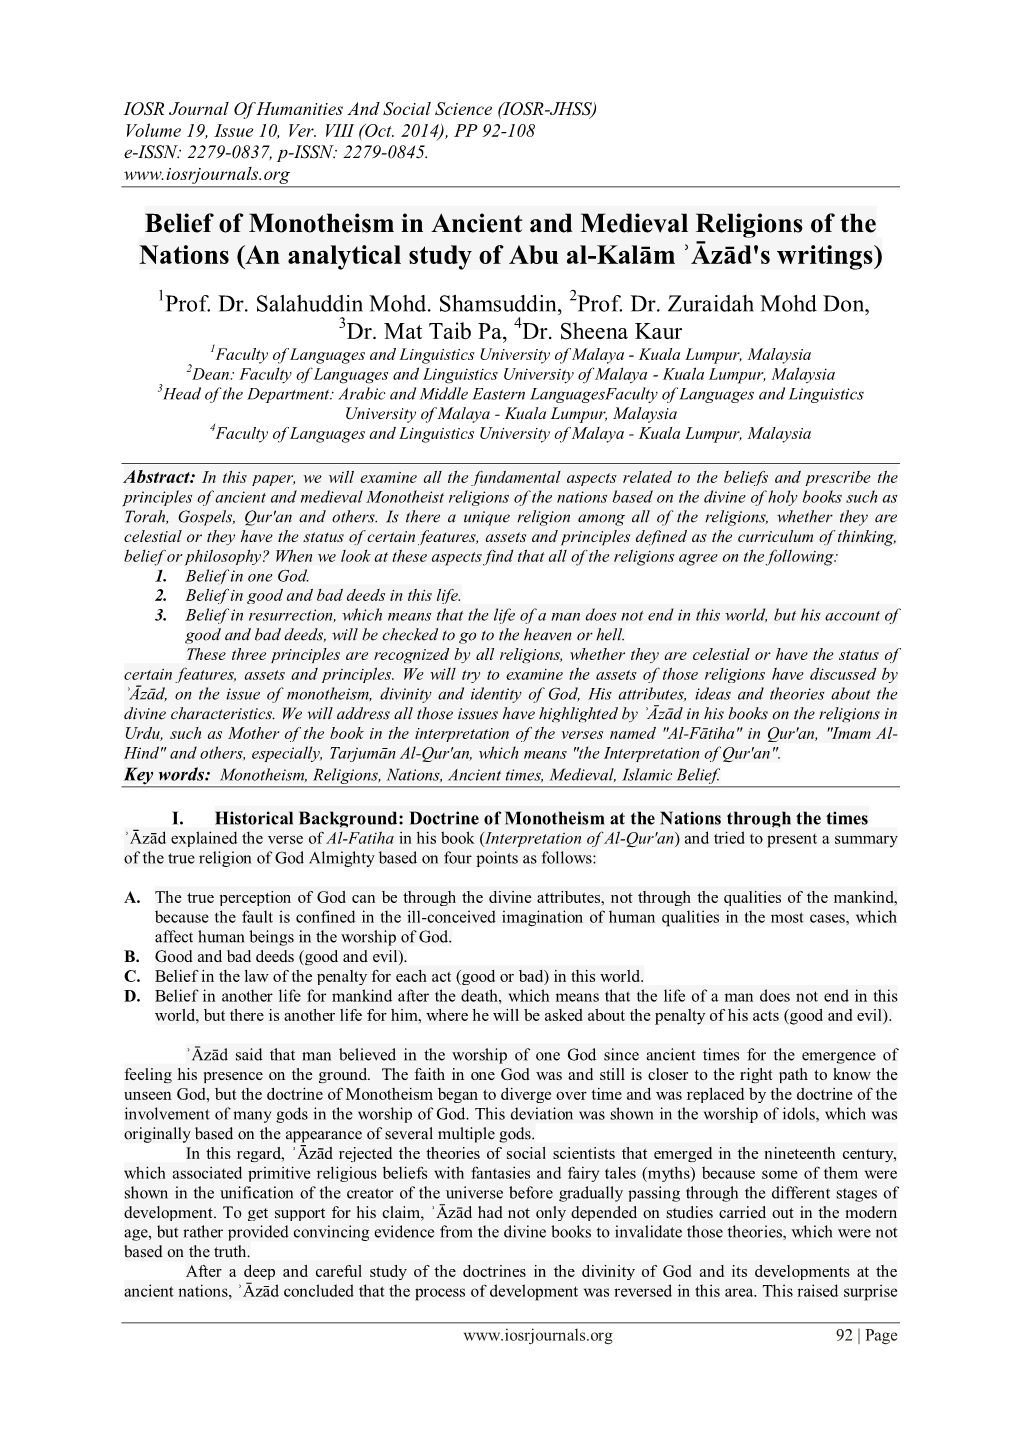 Belief of Monotheism in Ancient and Medieval Religions of the Nations (An Analytical Study of Abu Al-Kalām ʾāzād's Writings)